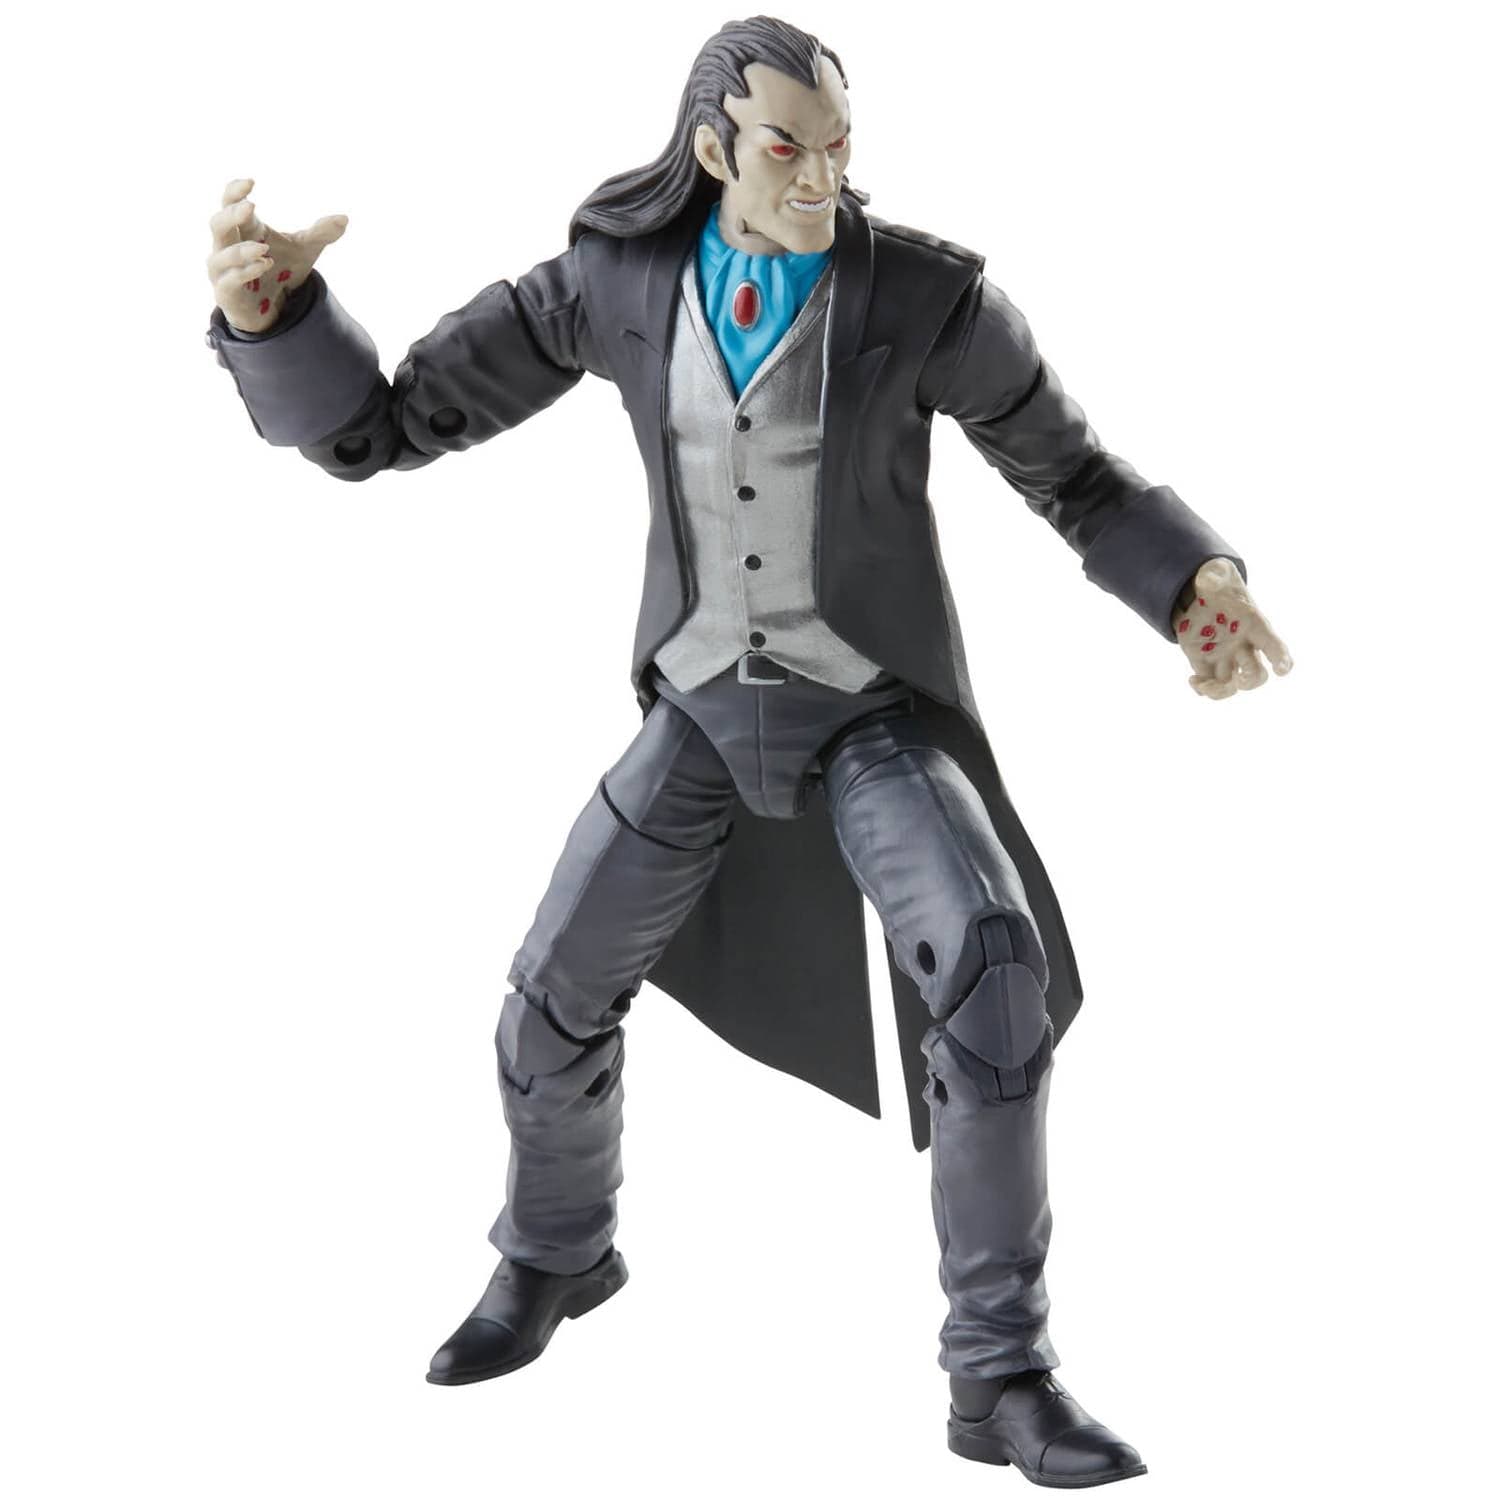 Hasbro Marvel Legends Series Morlun 6 Inch Action Figure and Build-A-Figure Part Stance